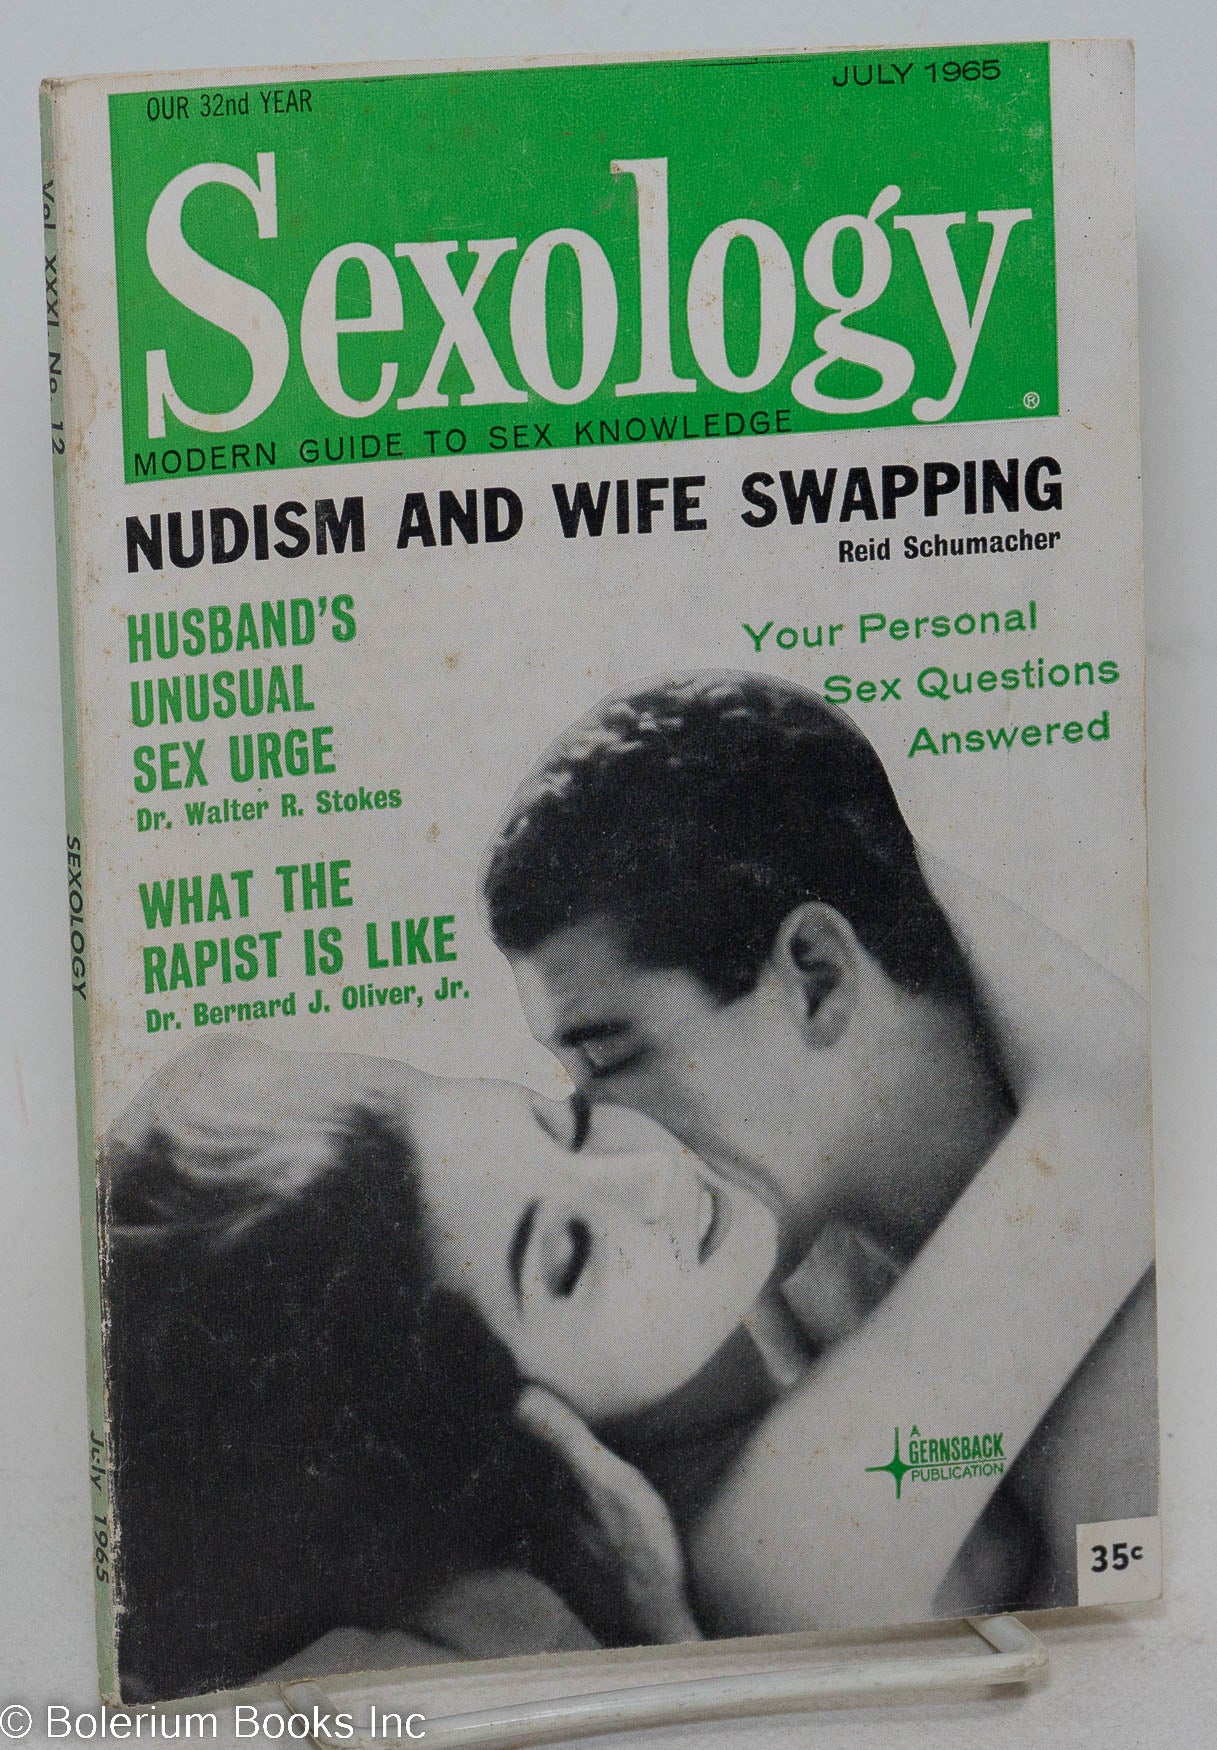 Sexology modern guide to sex knowledge;